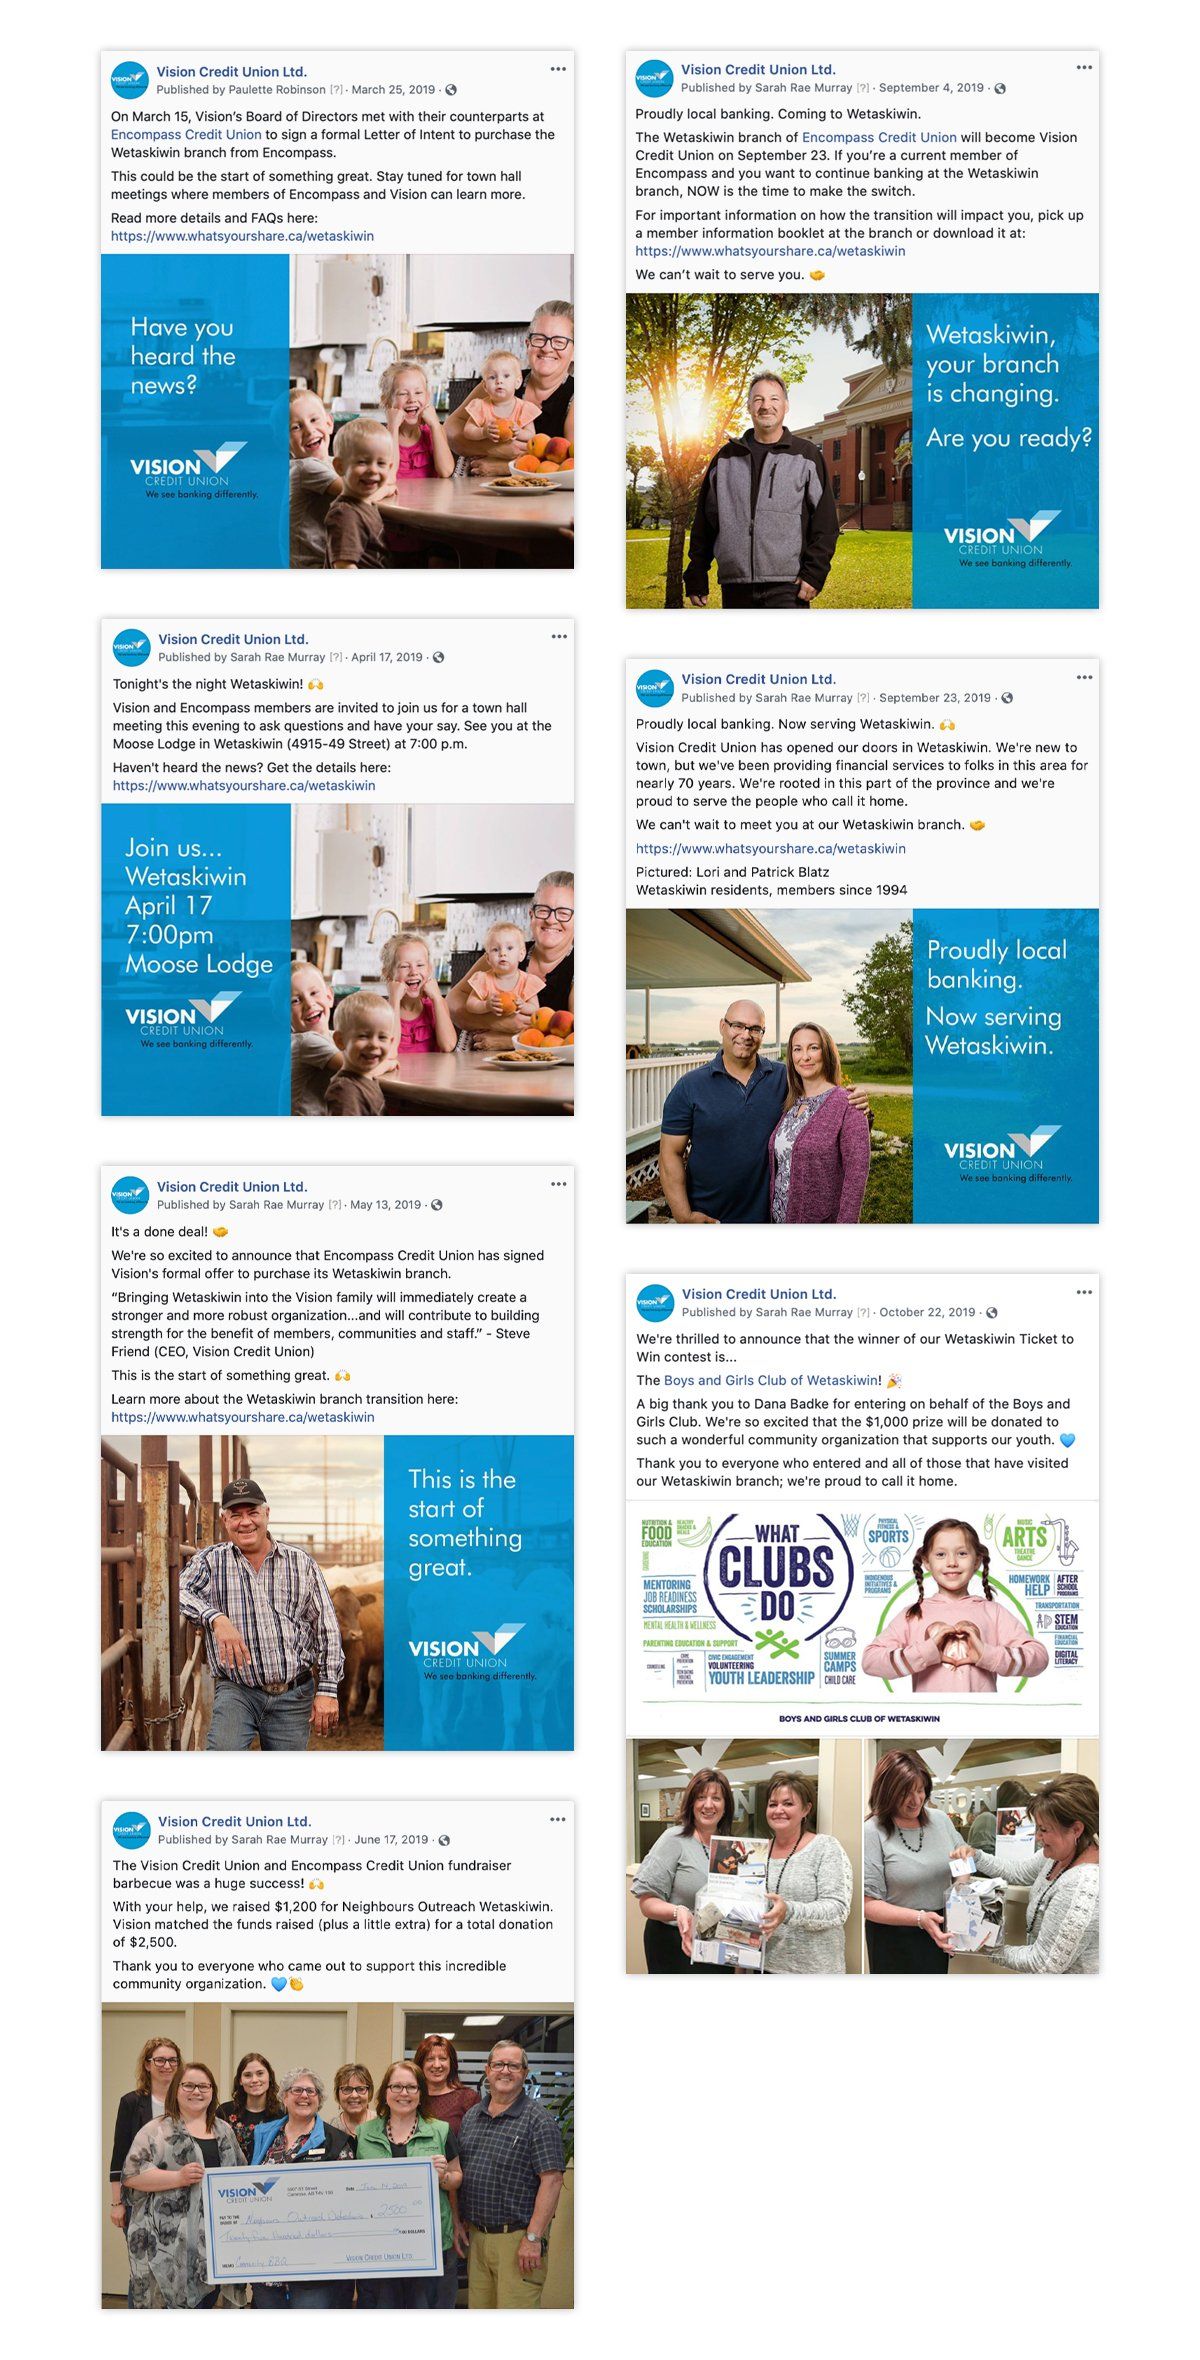 SOCIAL MEDIA AND FACEBOOK MARKETING CAMPAIGN FOR VISION CREDIT UNION BY IVY DESIGN INC